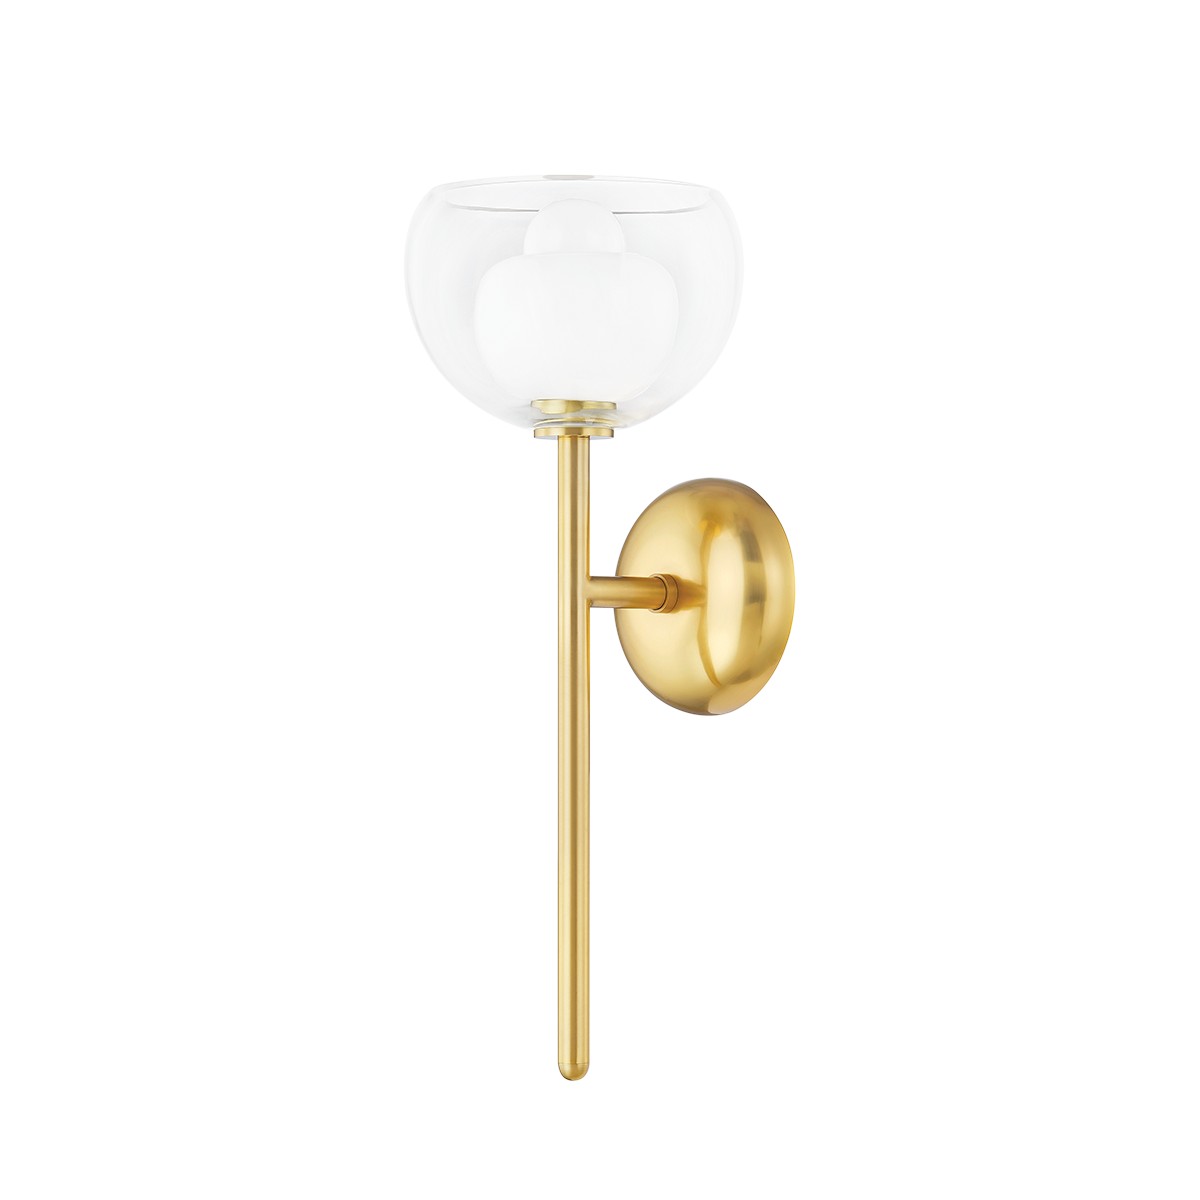 Mitzi - H813101-AGB - One Light Wall Sconce - Cortney - Aged Brass